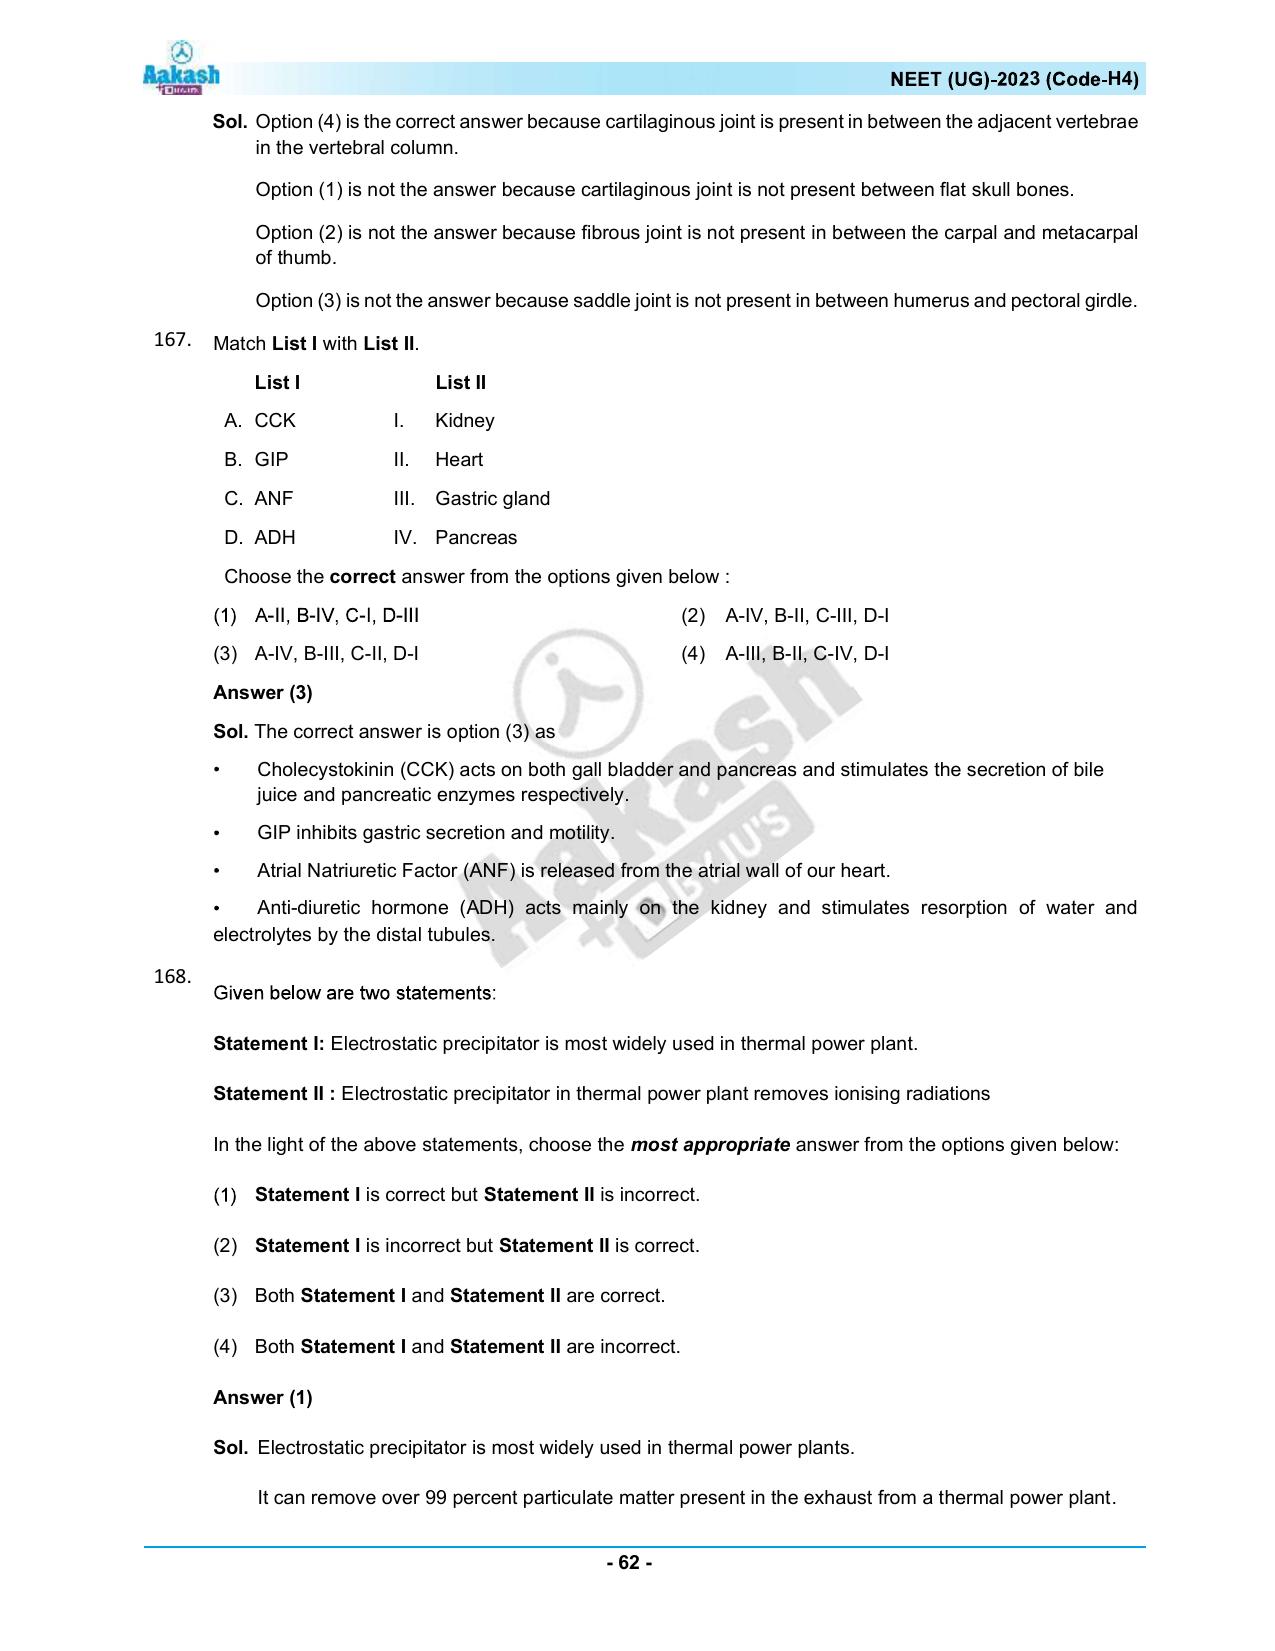 NEET 2023 Question Paper H4 - Page 62